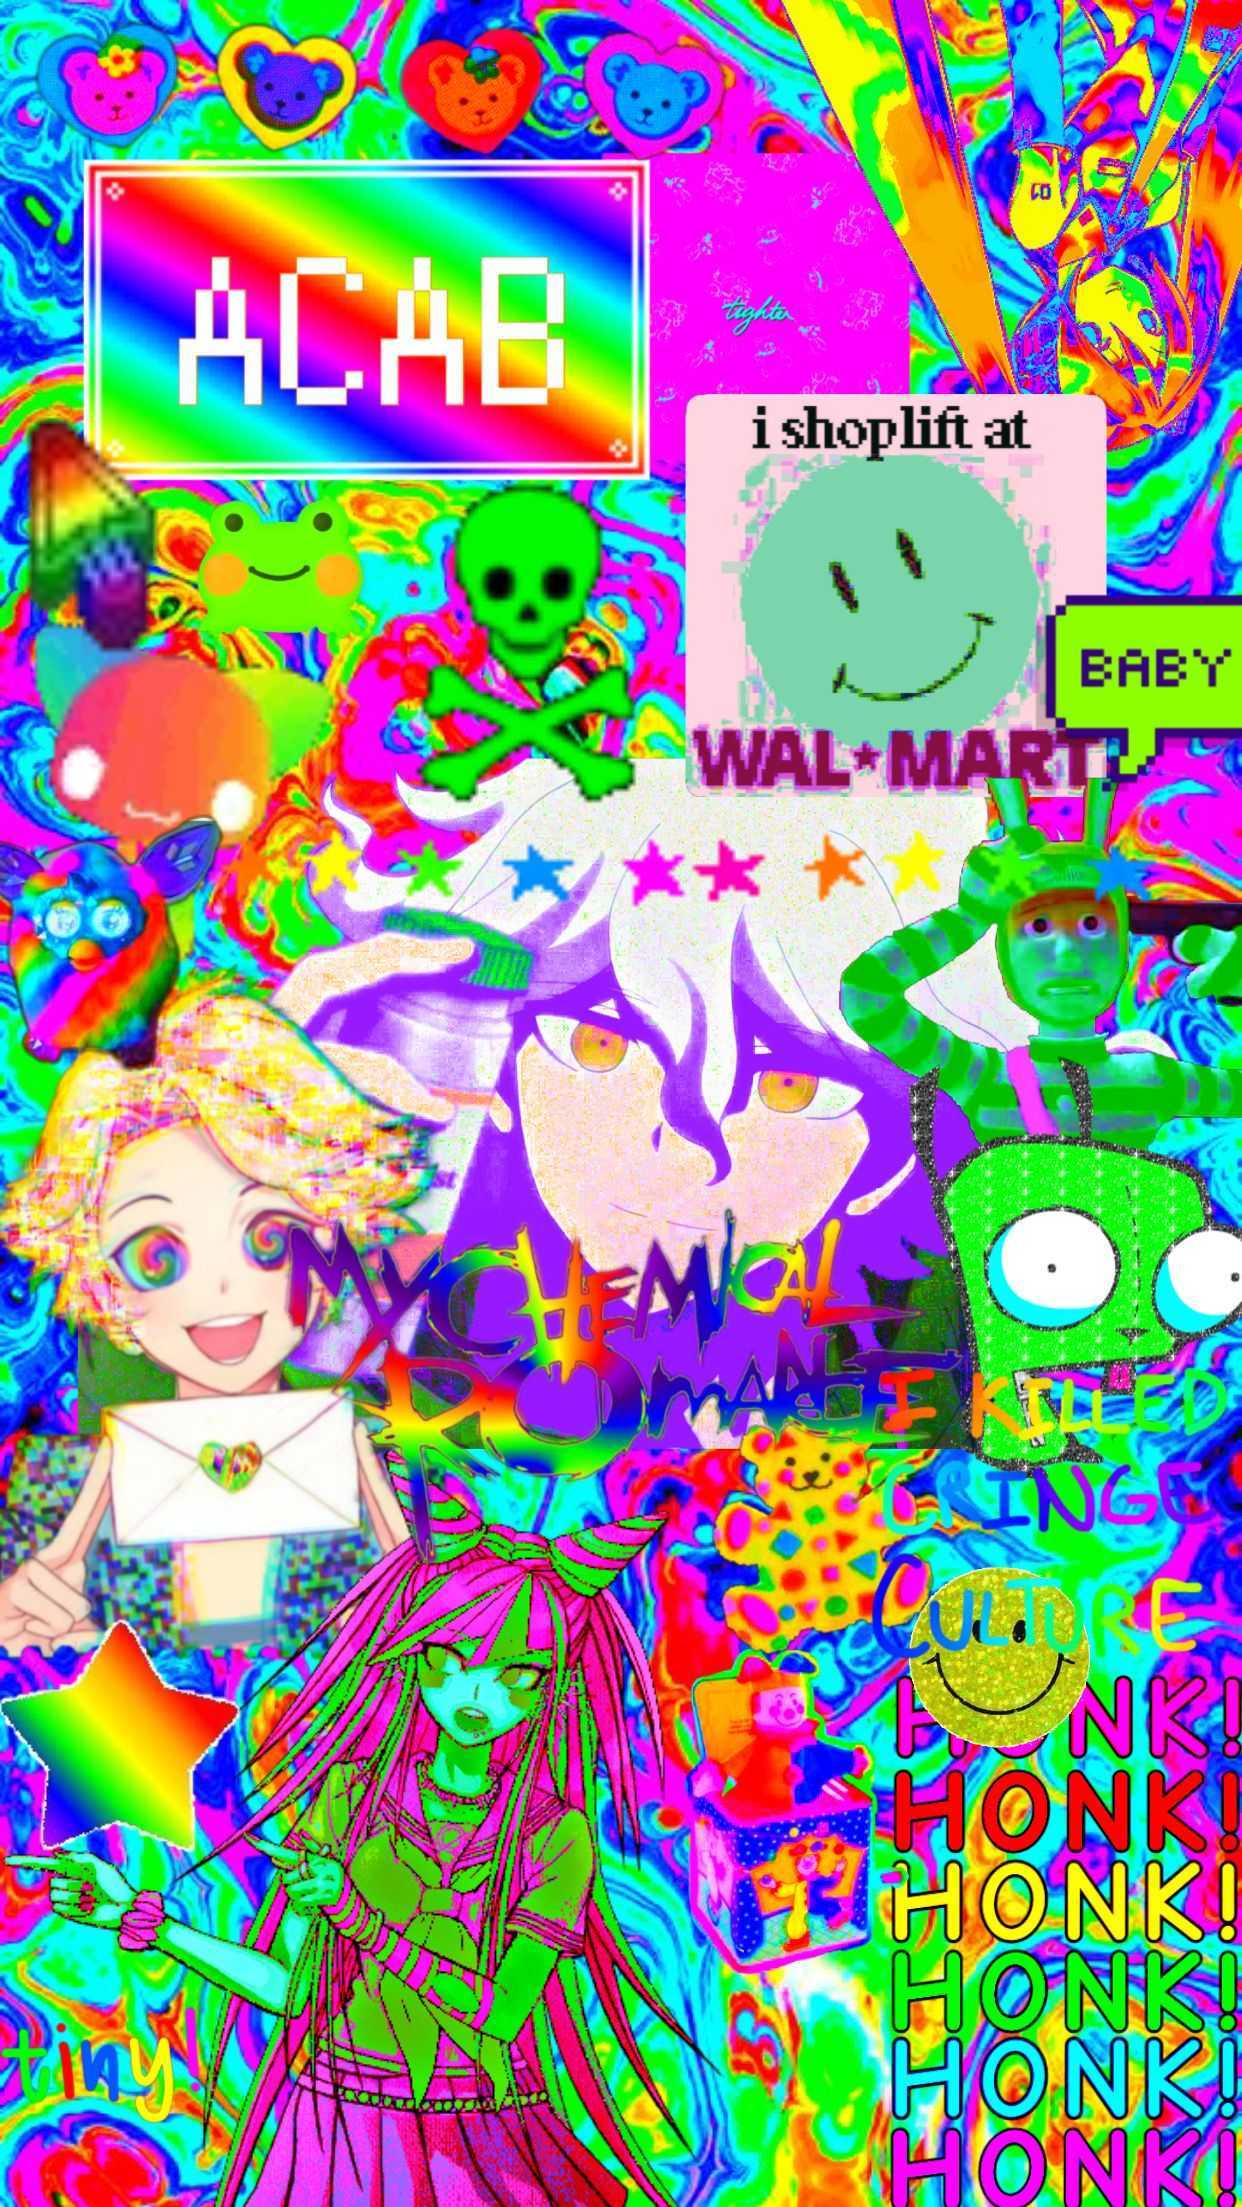 A colorful poster with many different characters - Weirdcore, kidcore, webcore, glitchcore